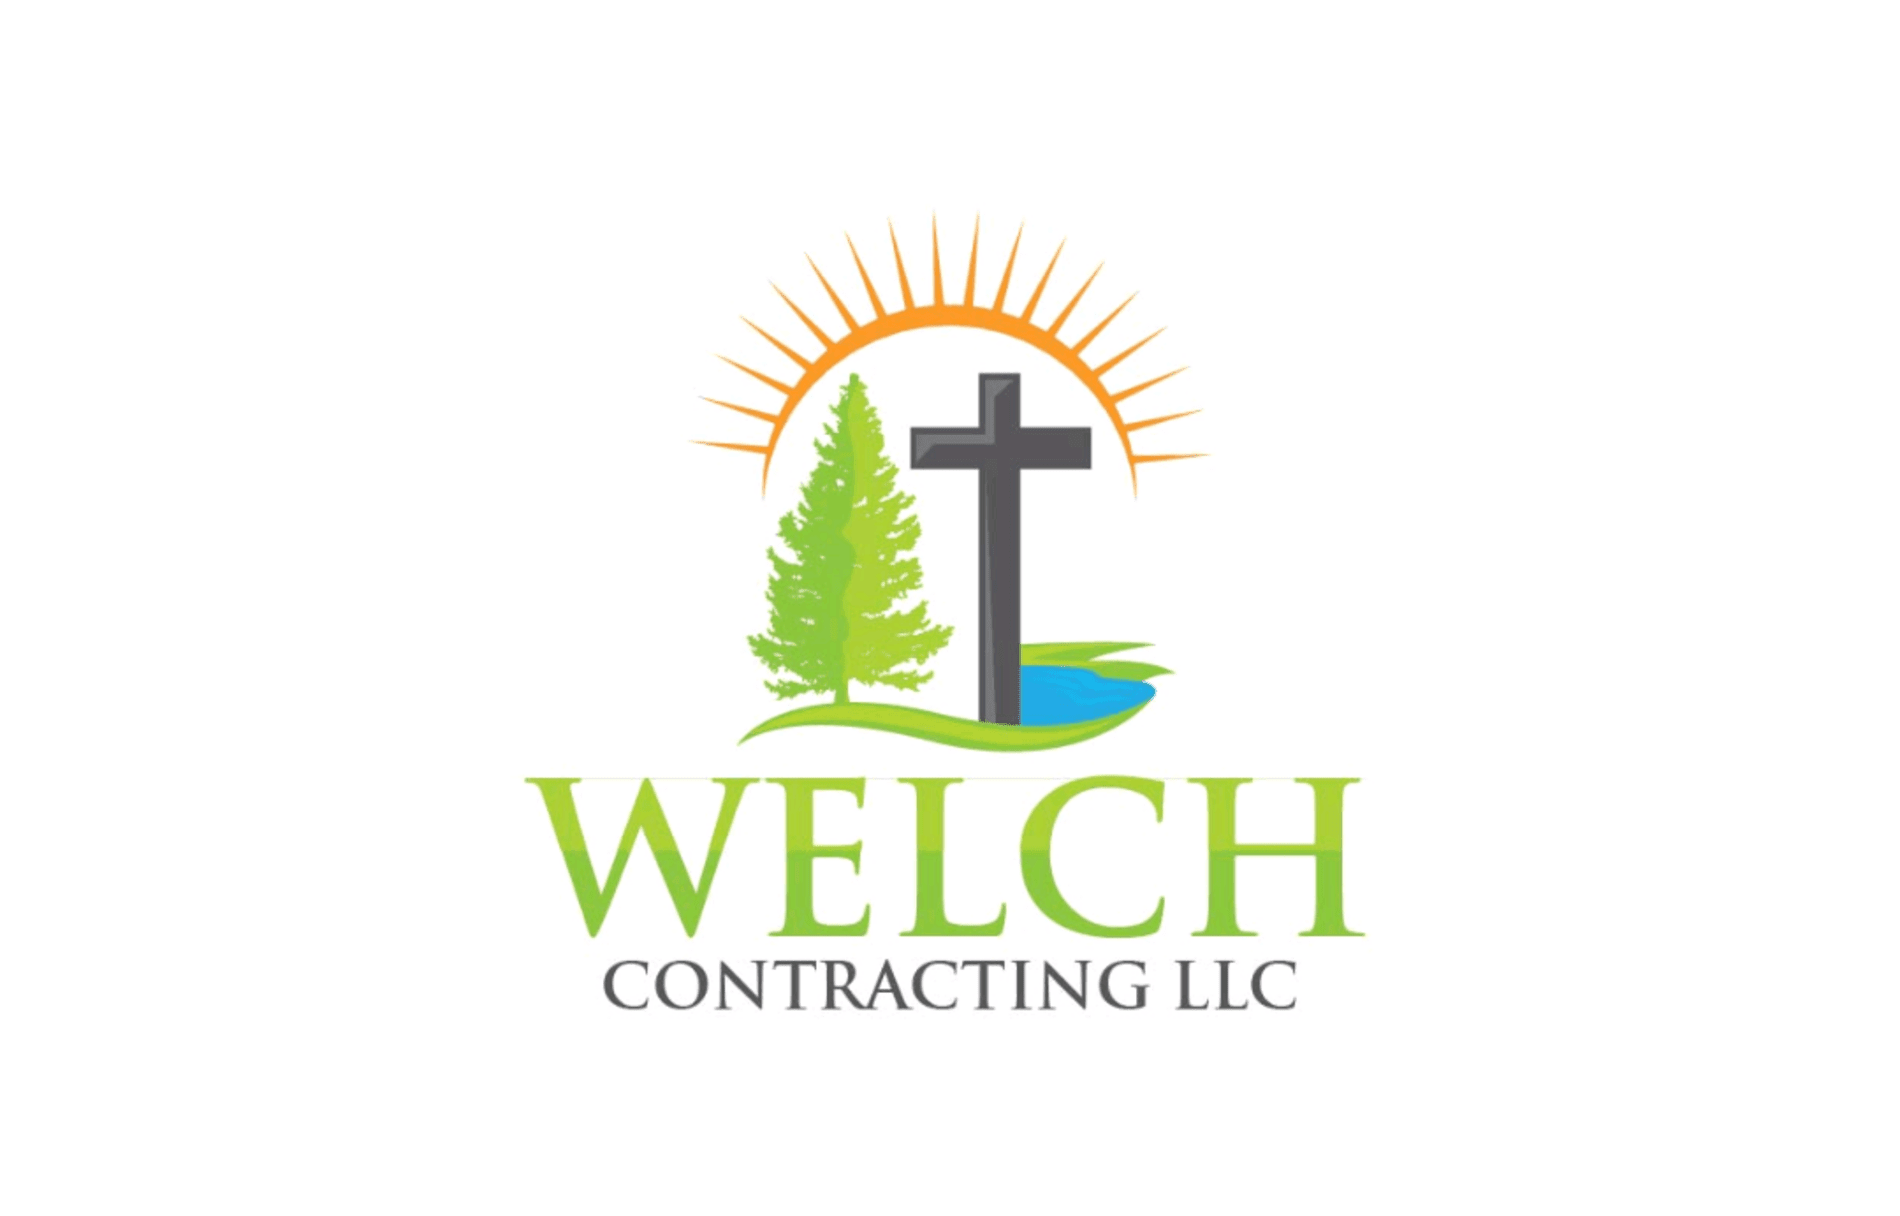 Welch Contracting LLC